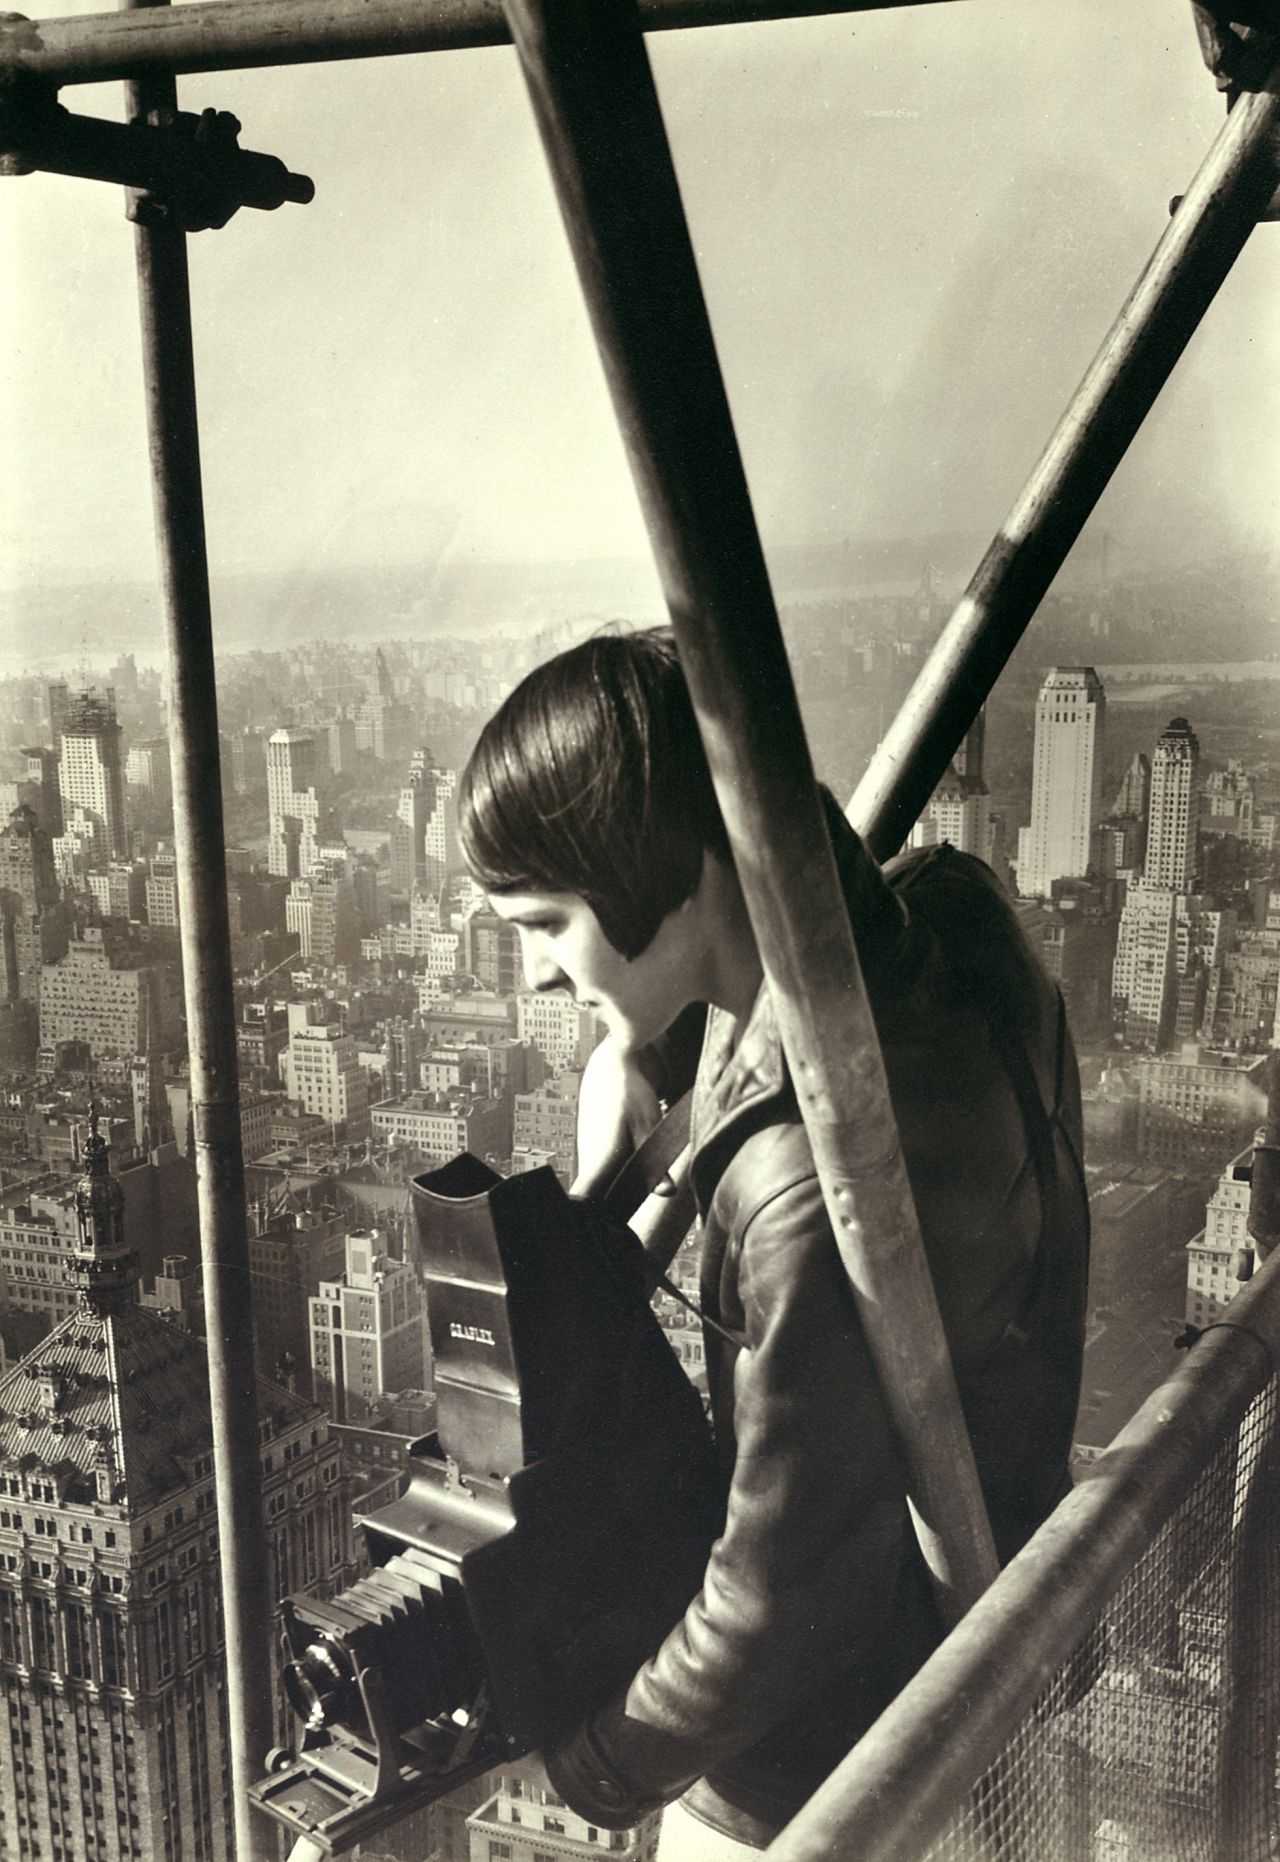 Margaret Bourke-White takes a photo atop a New York City building in 1931. She was working for Fortune magazine at the time, and she was the publication's first staff photographer. Over her career, Bourke-White compiled many more firsts. She was the first woman to be hired as a photojournalist for Life magazine. She was the first professional photographer from the West to be permitted into the Soviet Union. And she was the first female war correspondent credentialed to work in combat zones during World War II. 